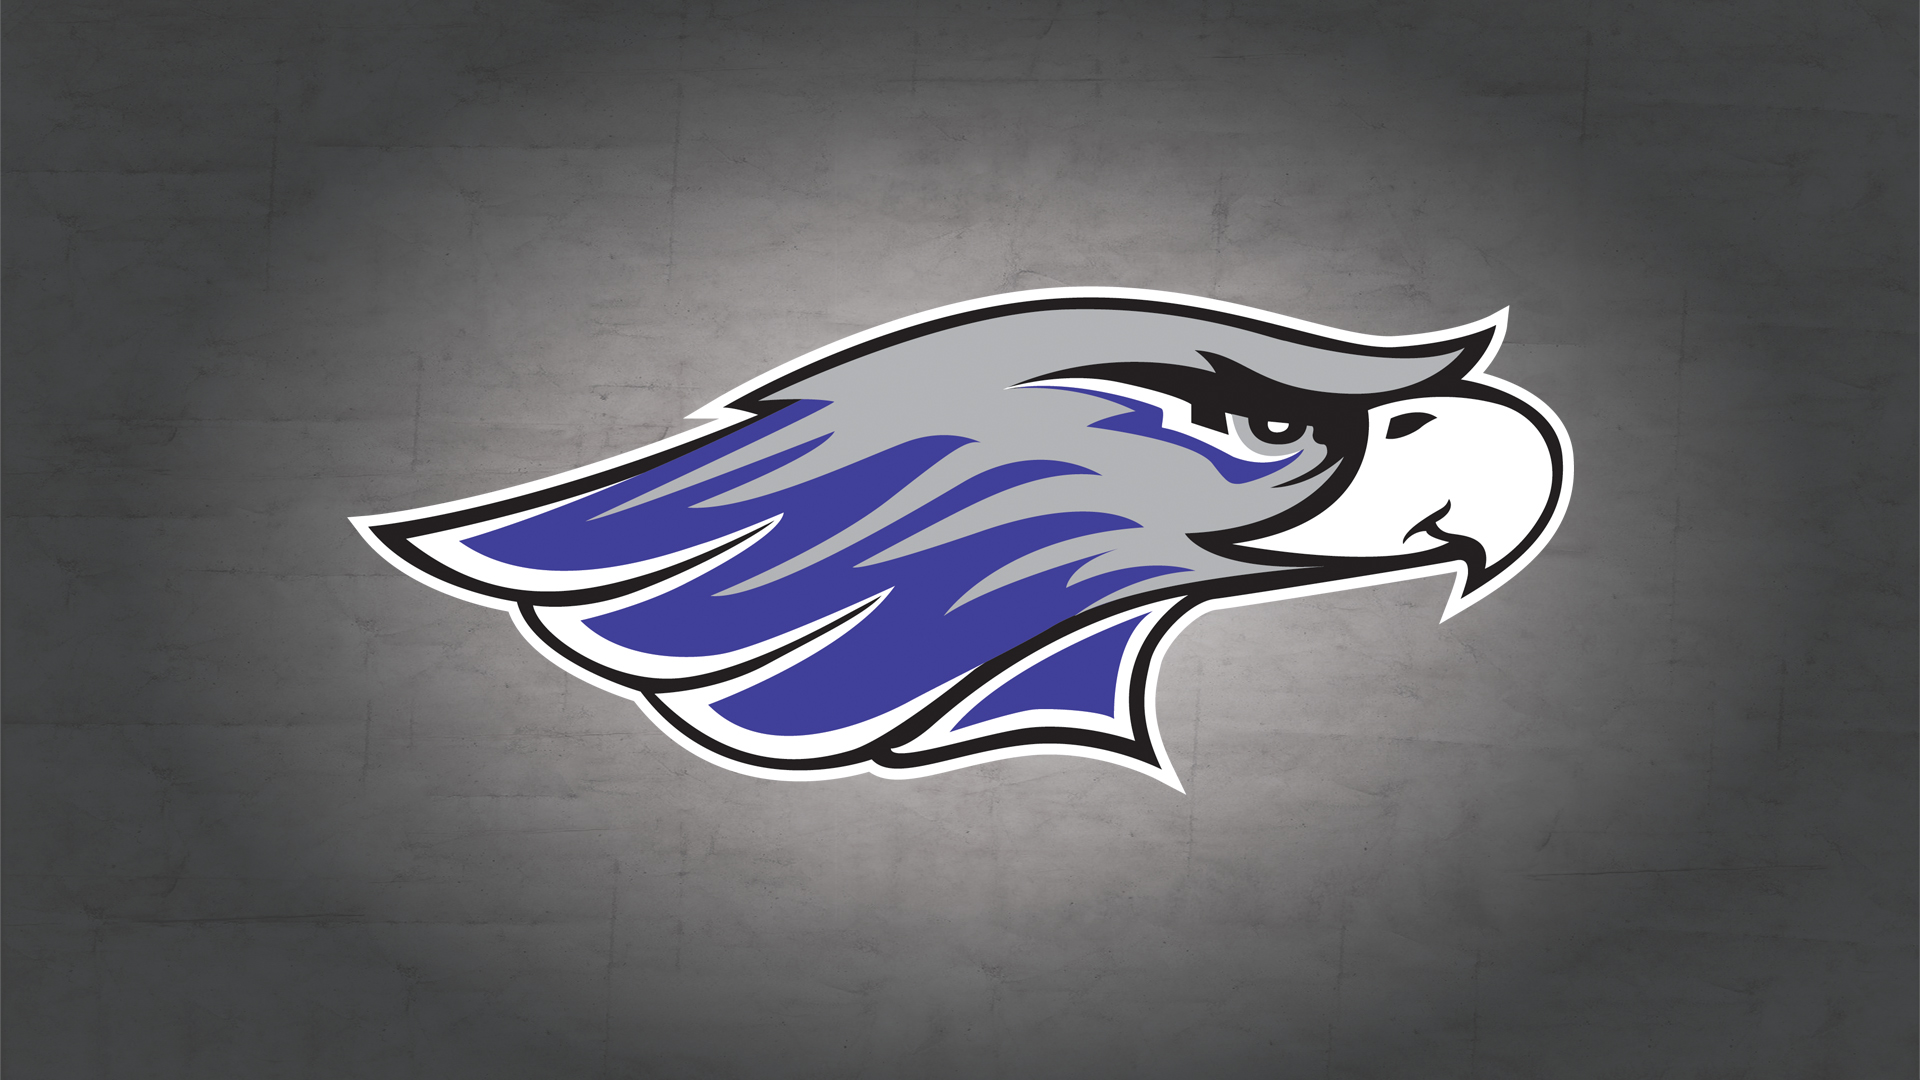 INTERIM TAG REMOVED: Wichser named Head Basketball Coach at Wisconsin Whitewater